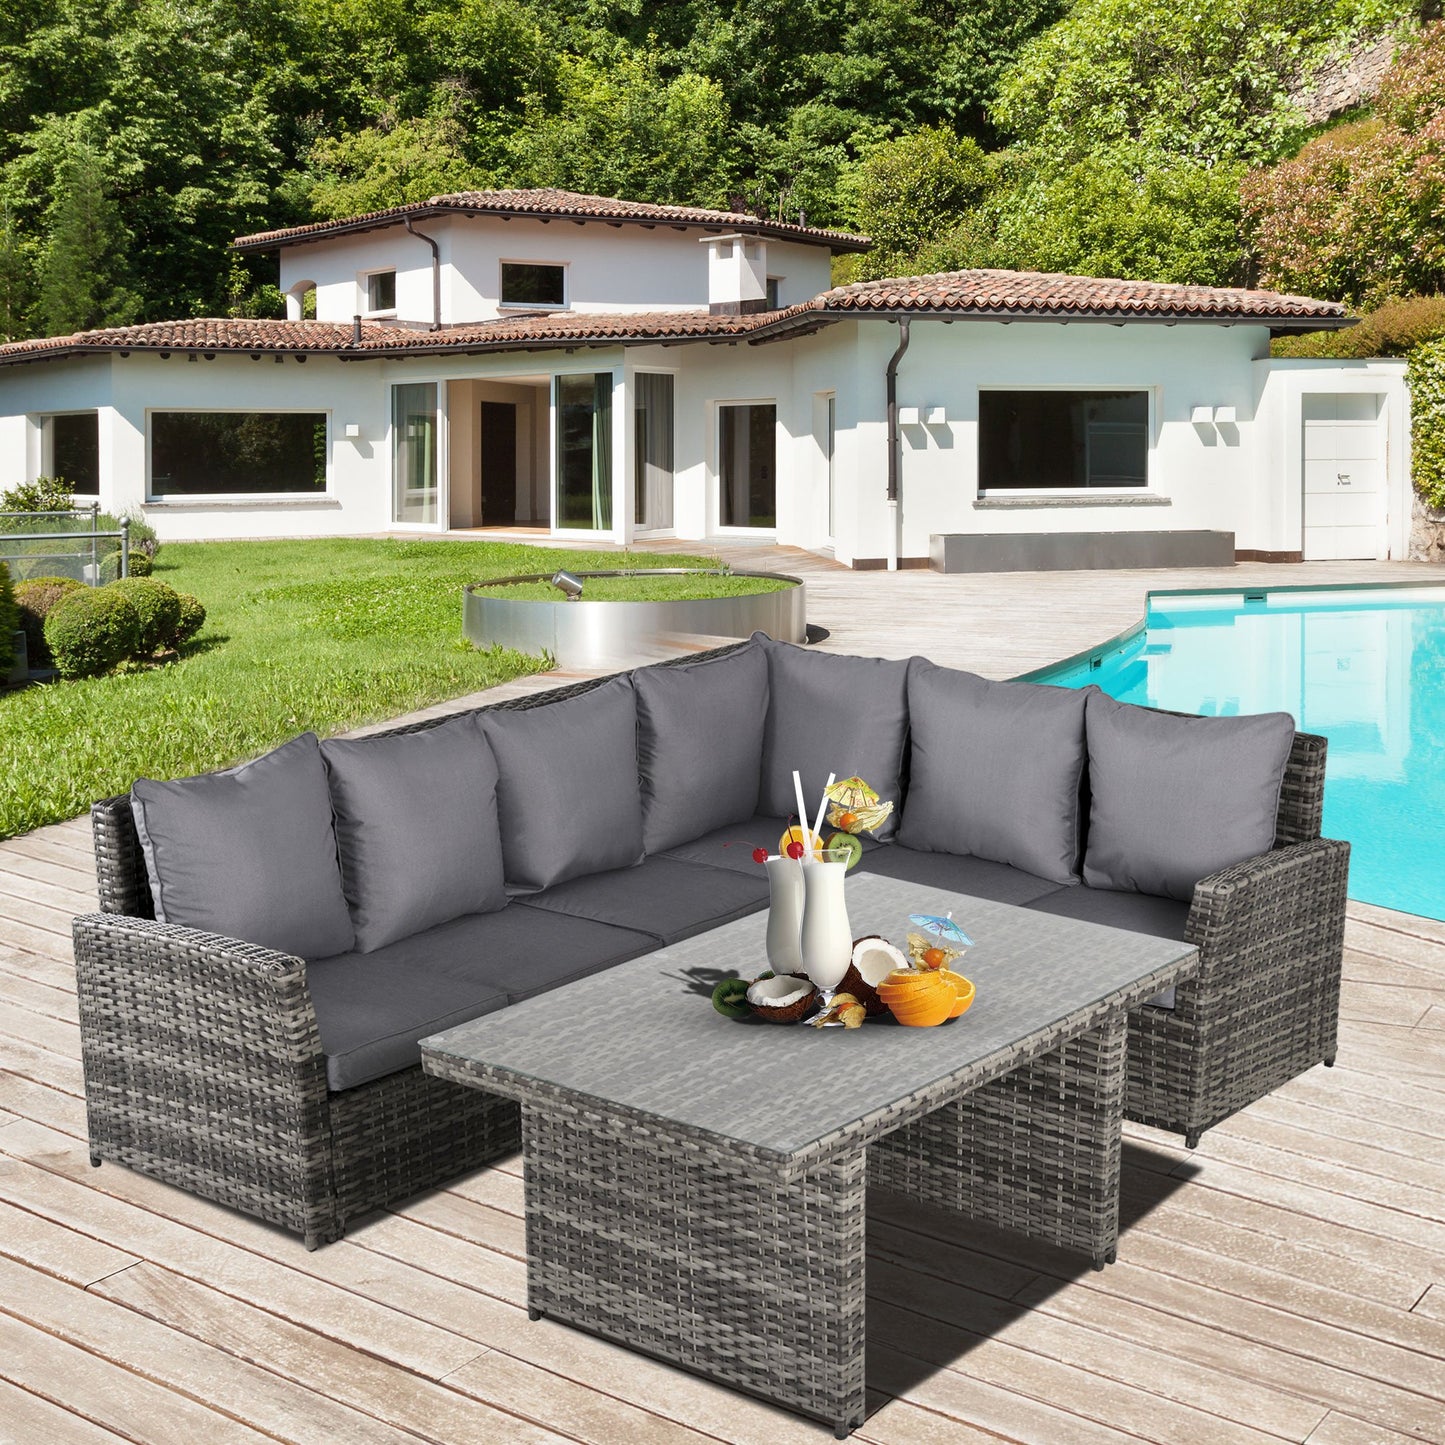 Outsunny 3 PCS Outdoor Dining Sets All Weather Rattan Sofa Furniture for Garden